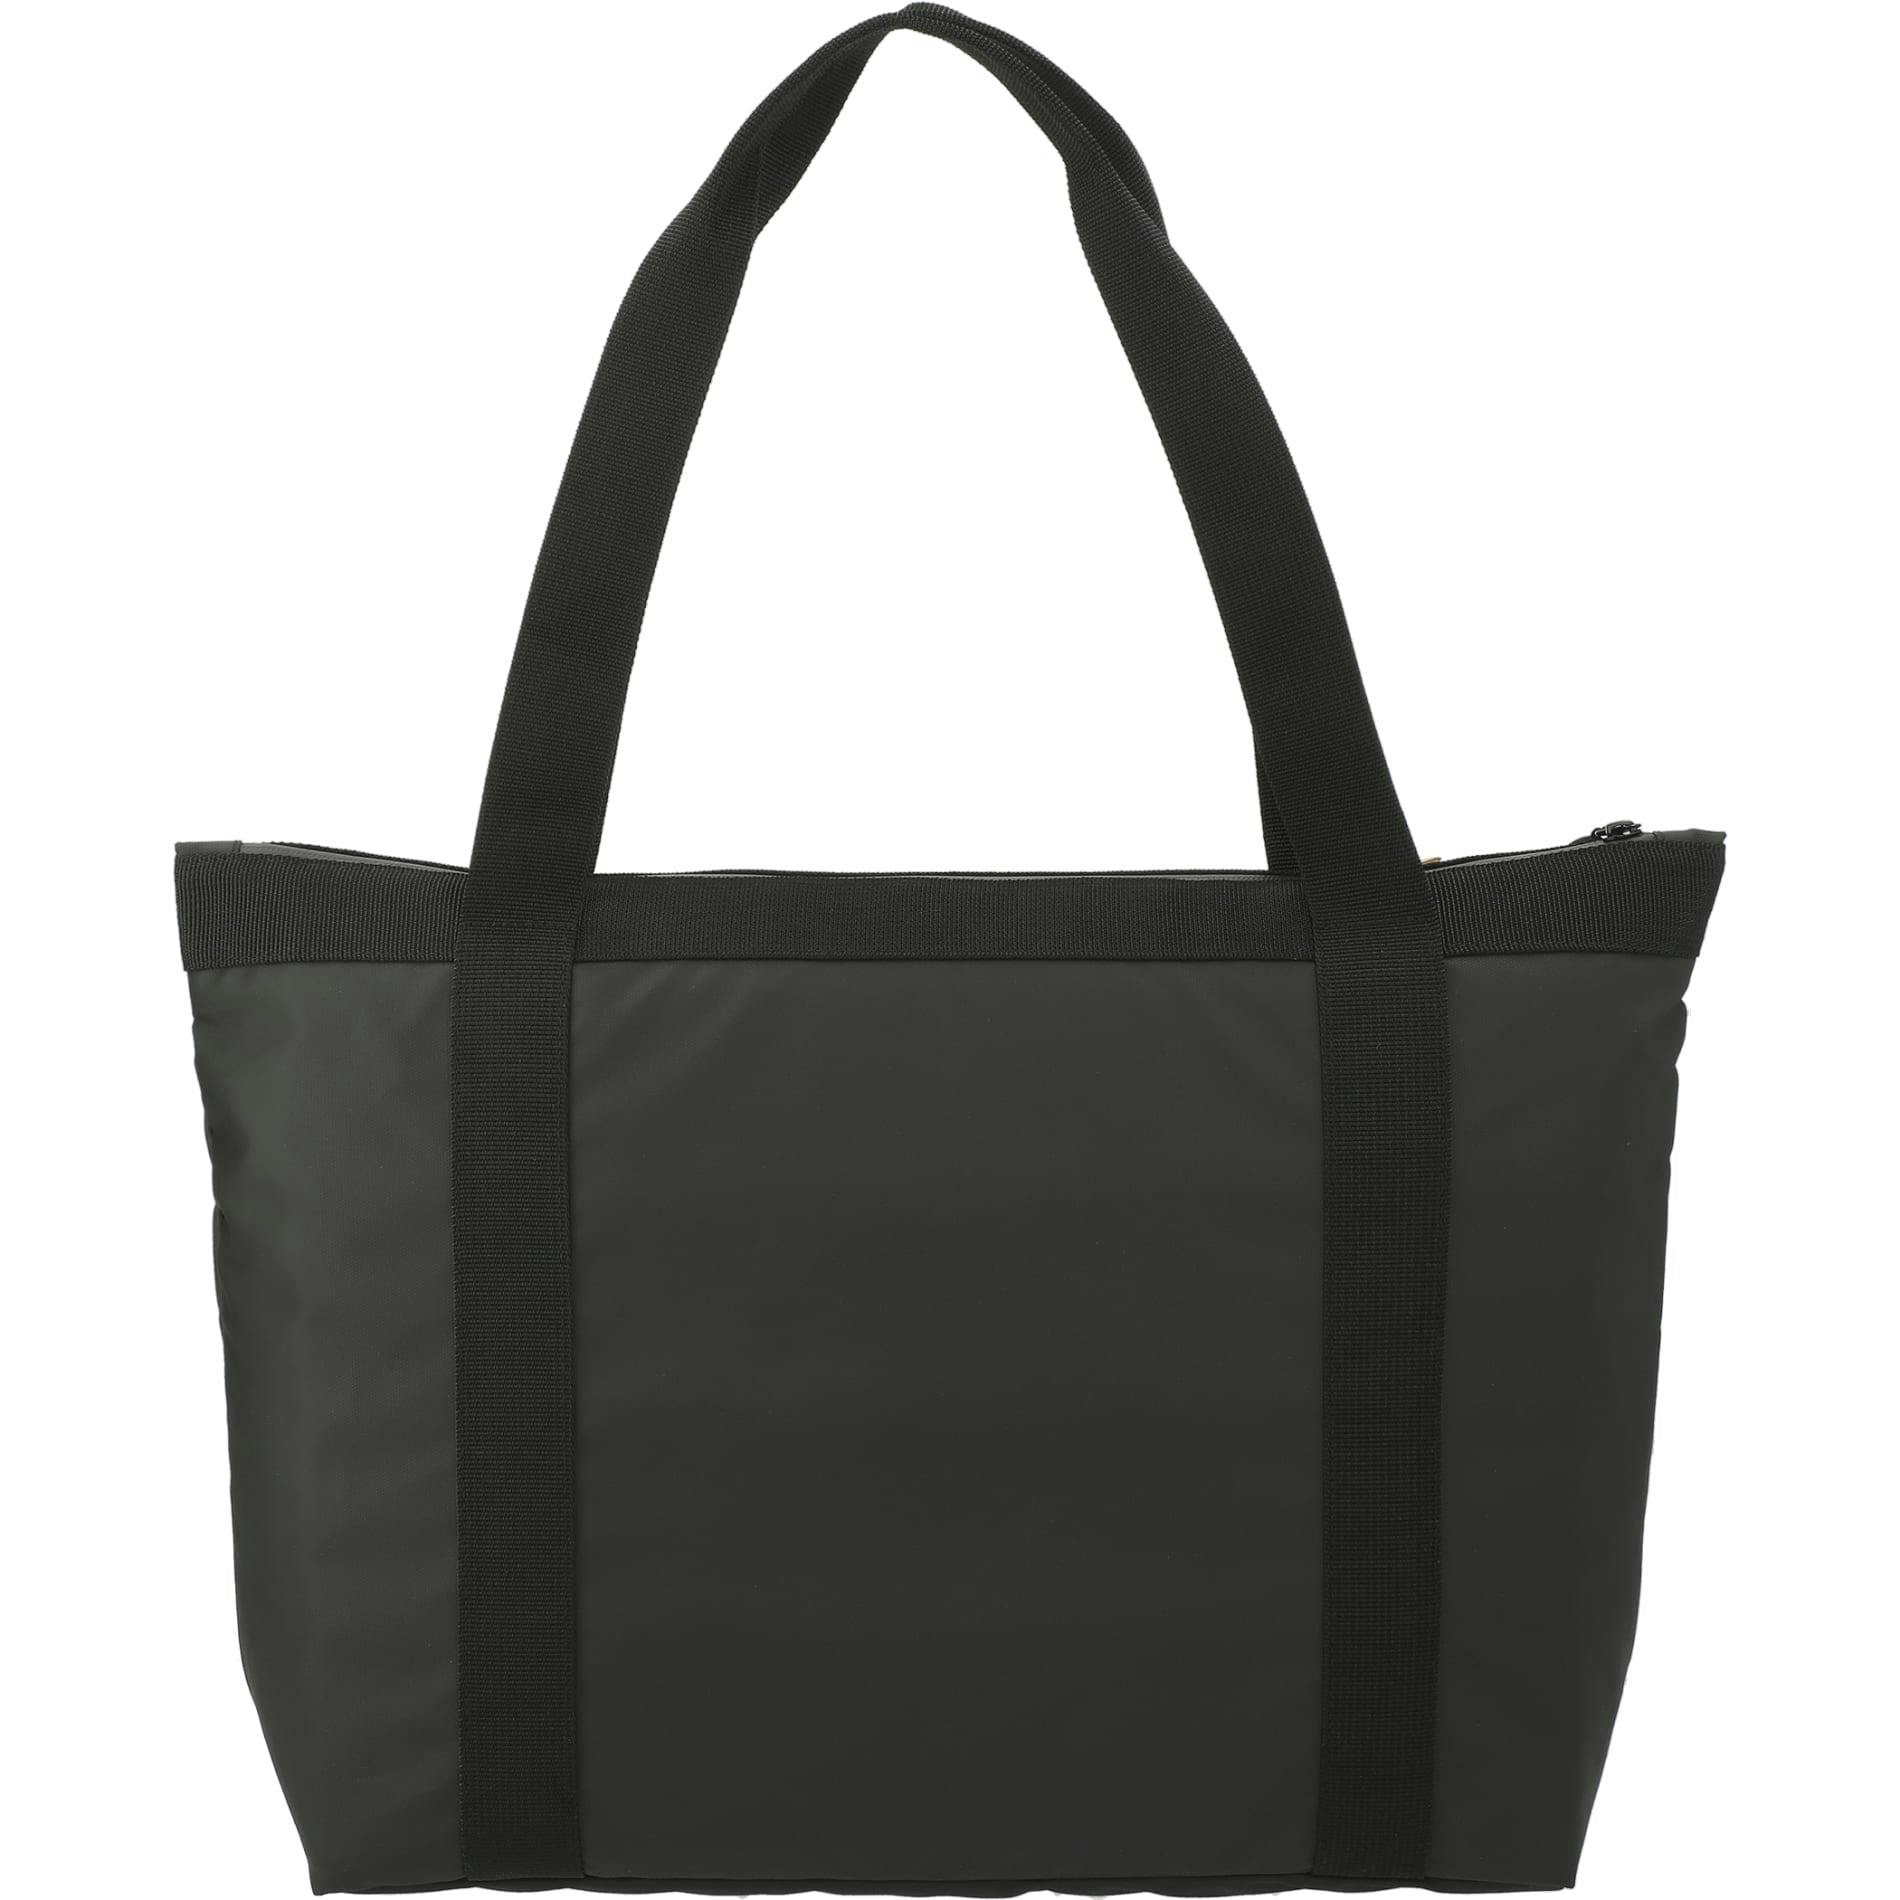 NBN All-Weather Recycled Tote - additional Image 2